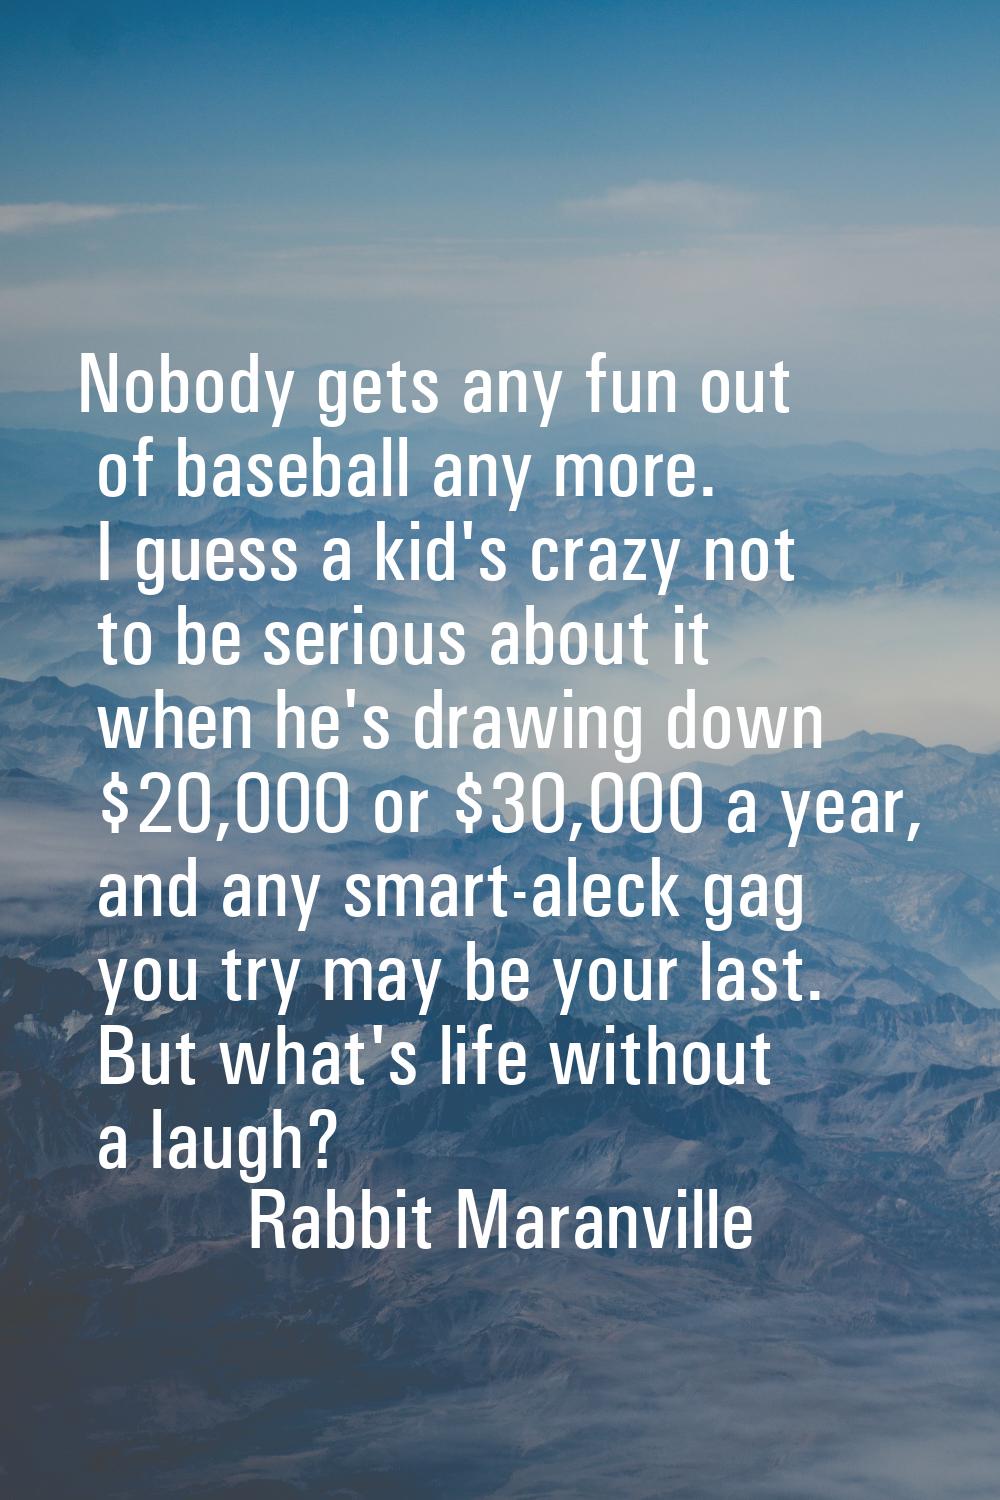 Nobody gets any fun out of baseball any more. I guess a kid's crazy not to be serious about it when